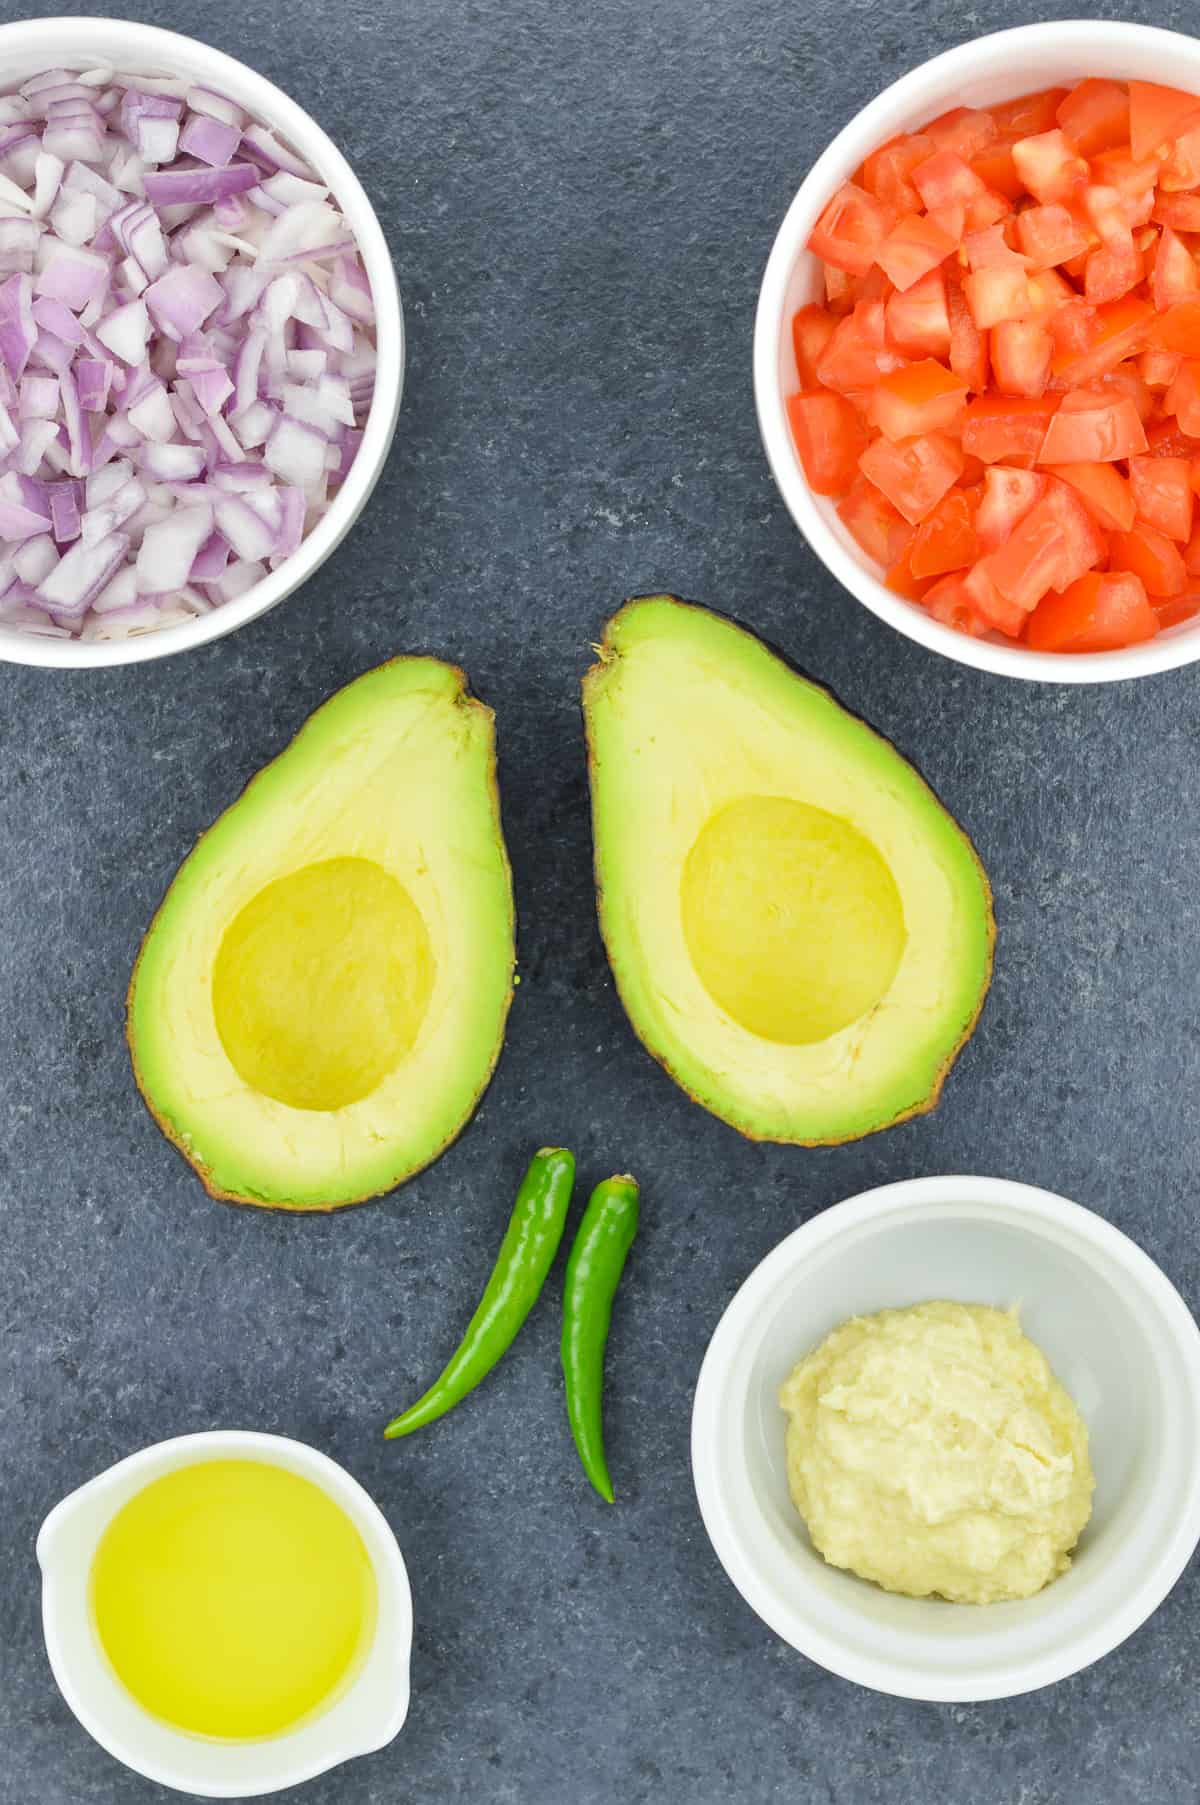 ingredients to make indian style guacamole placed on a dark surface - one avocado cut vertically into two pieces, and placed face up, along with bowl of chopped onions, chopped tomatoes, ginger garlic paste, extra virgin olive oil, and 2 green chillies